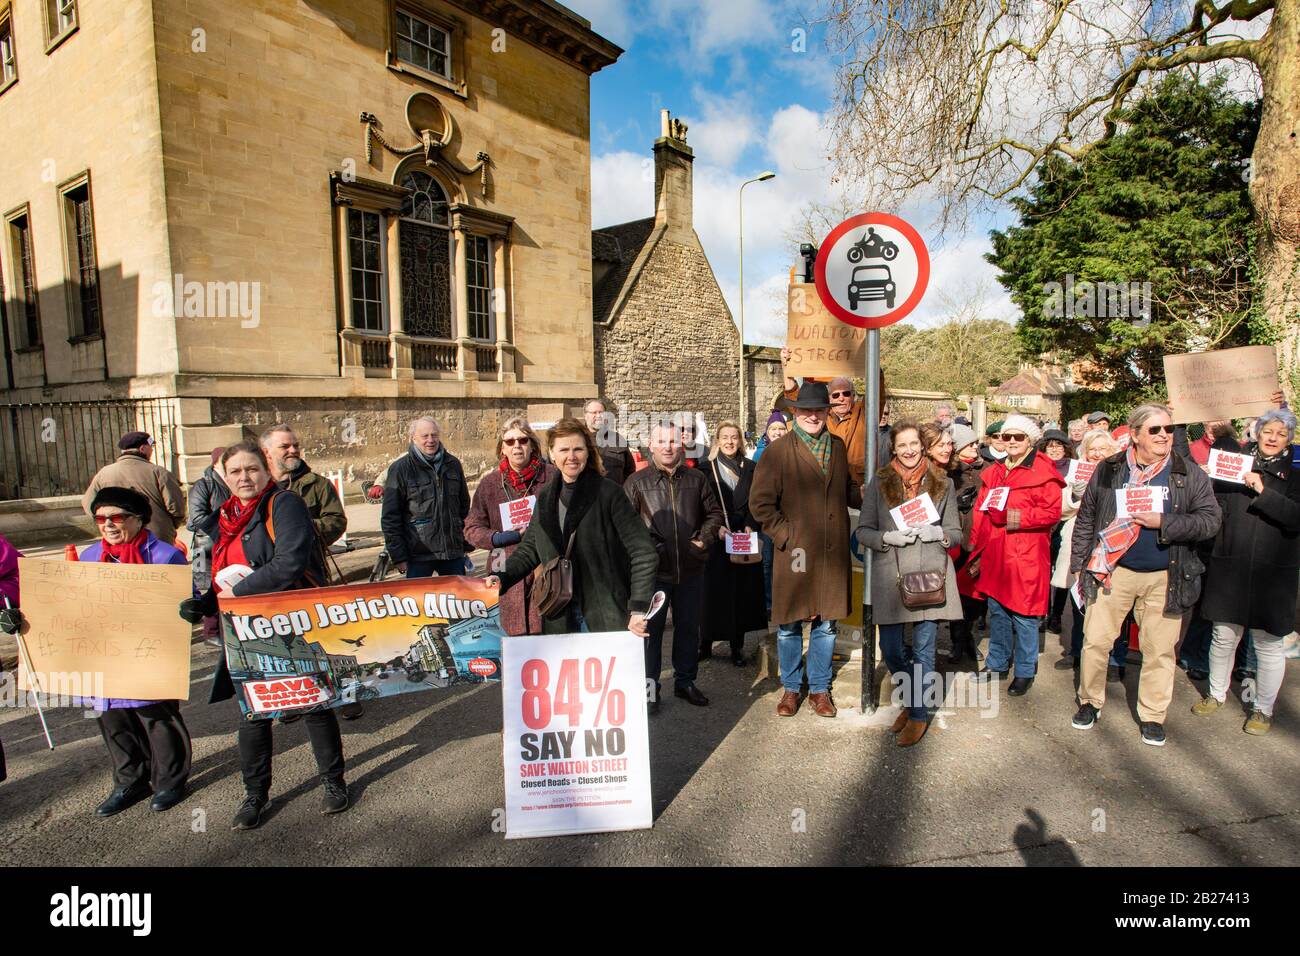 Oxford, Oxfordshire, UK. 1 March, 2020. Dozens turn out to the Save Walton Street demonstration.  Residents and Businesses of Oxford's historic Jericho district protest the Oxfordshire County Council's closure of the main artery Walton Street. The street closed with out proper traffic or air quality surveys or consultation with residents and businesses. Credit: Sidney Bruere/Alamy Live News Stock Photo